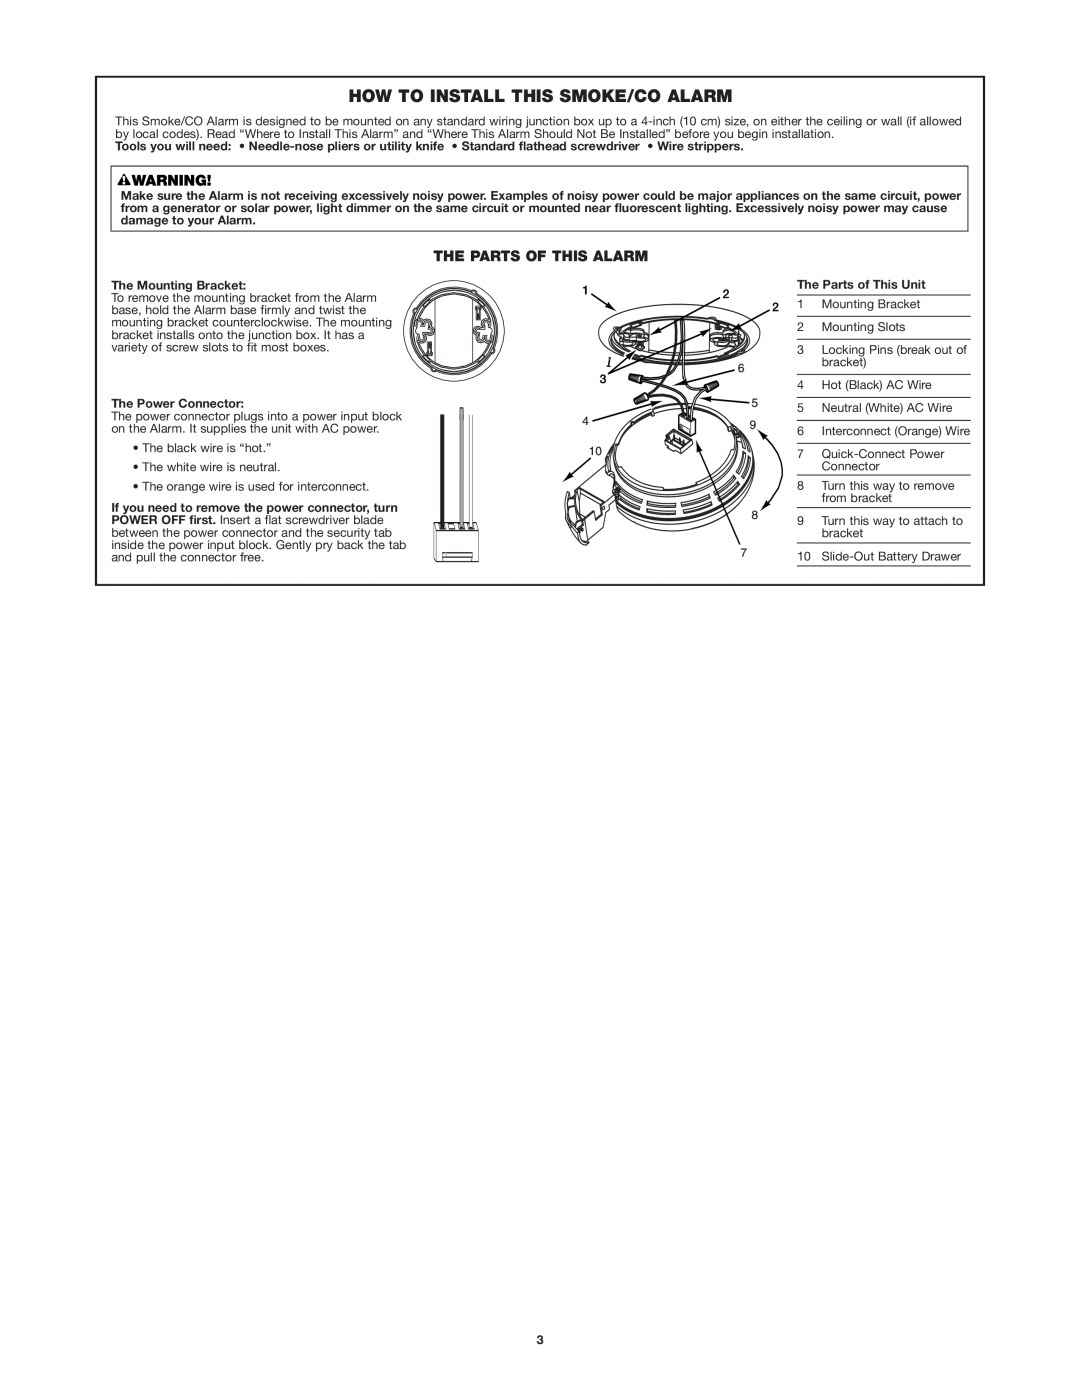 BRK electronic SC7010B user manual How To Install This Smoke/Co Alarm, The Parts Of This Alarm 